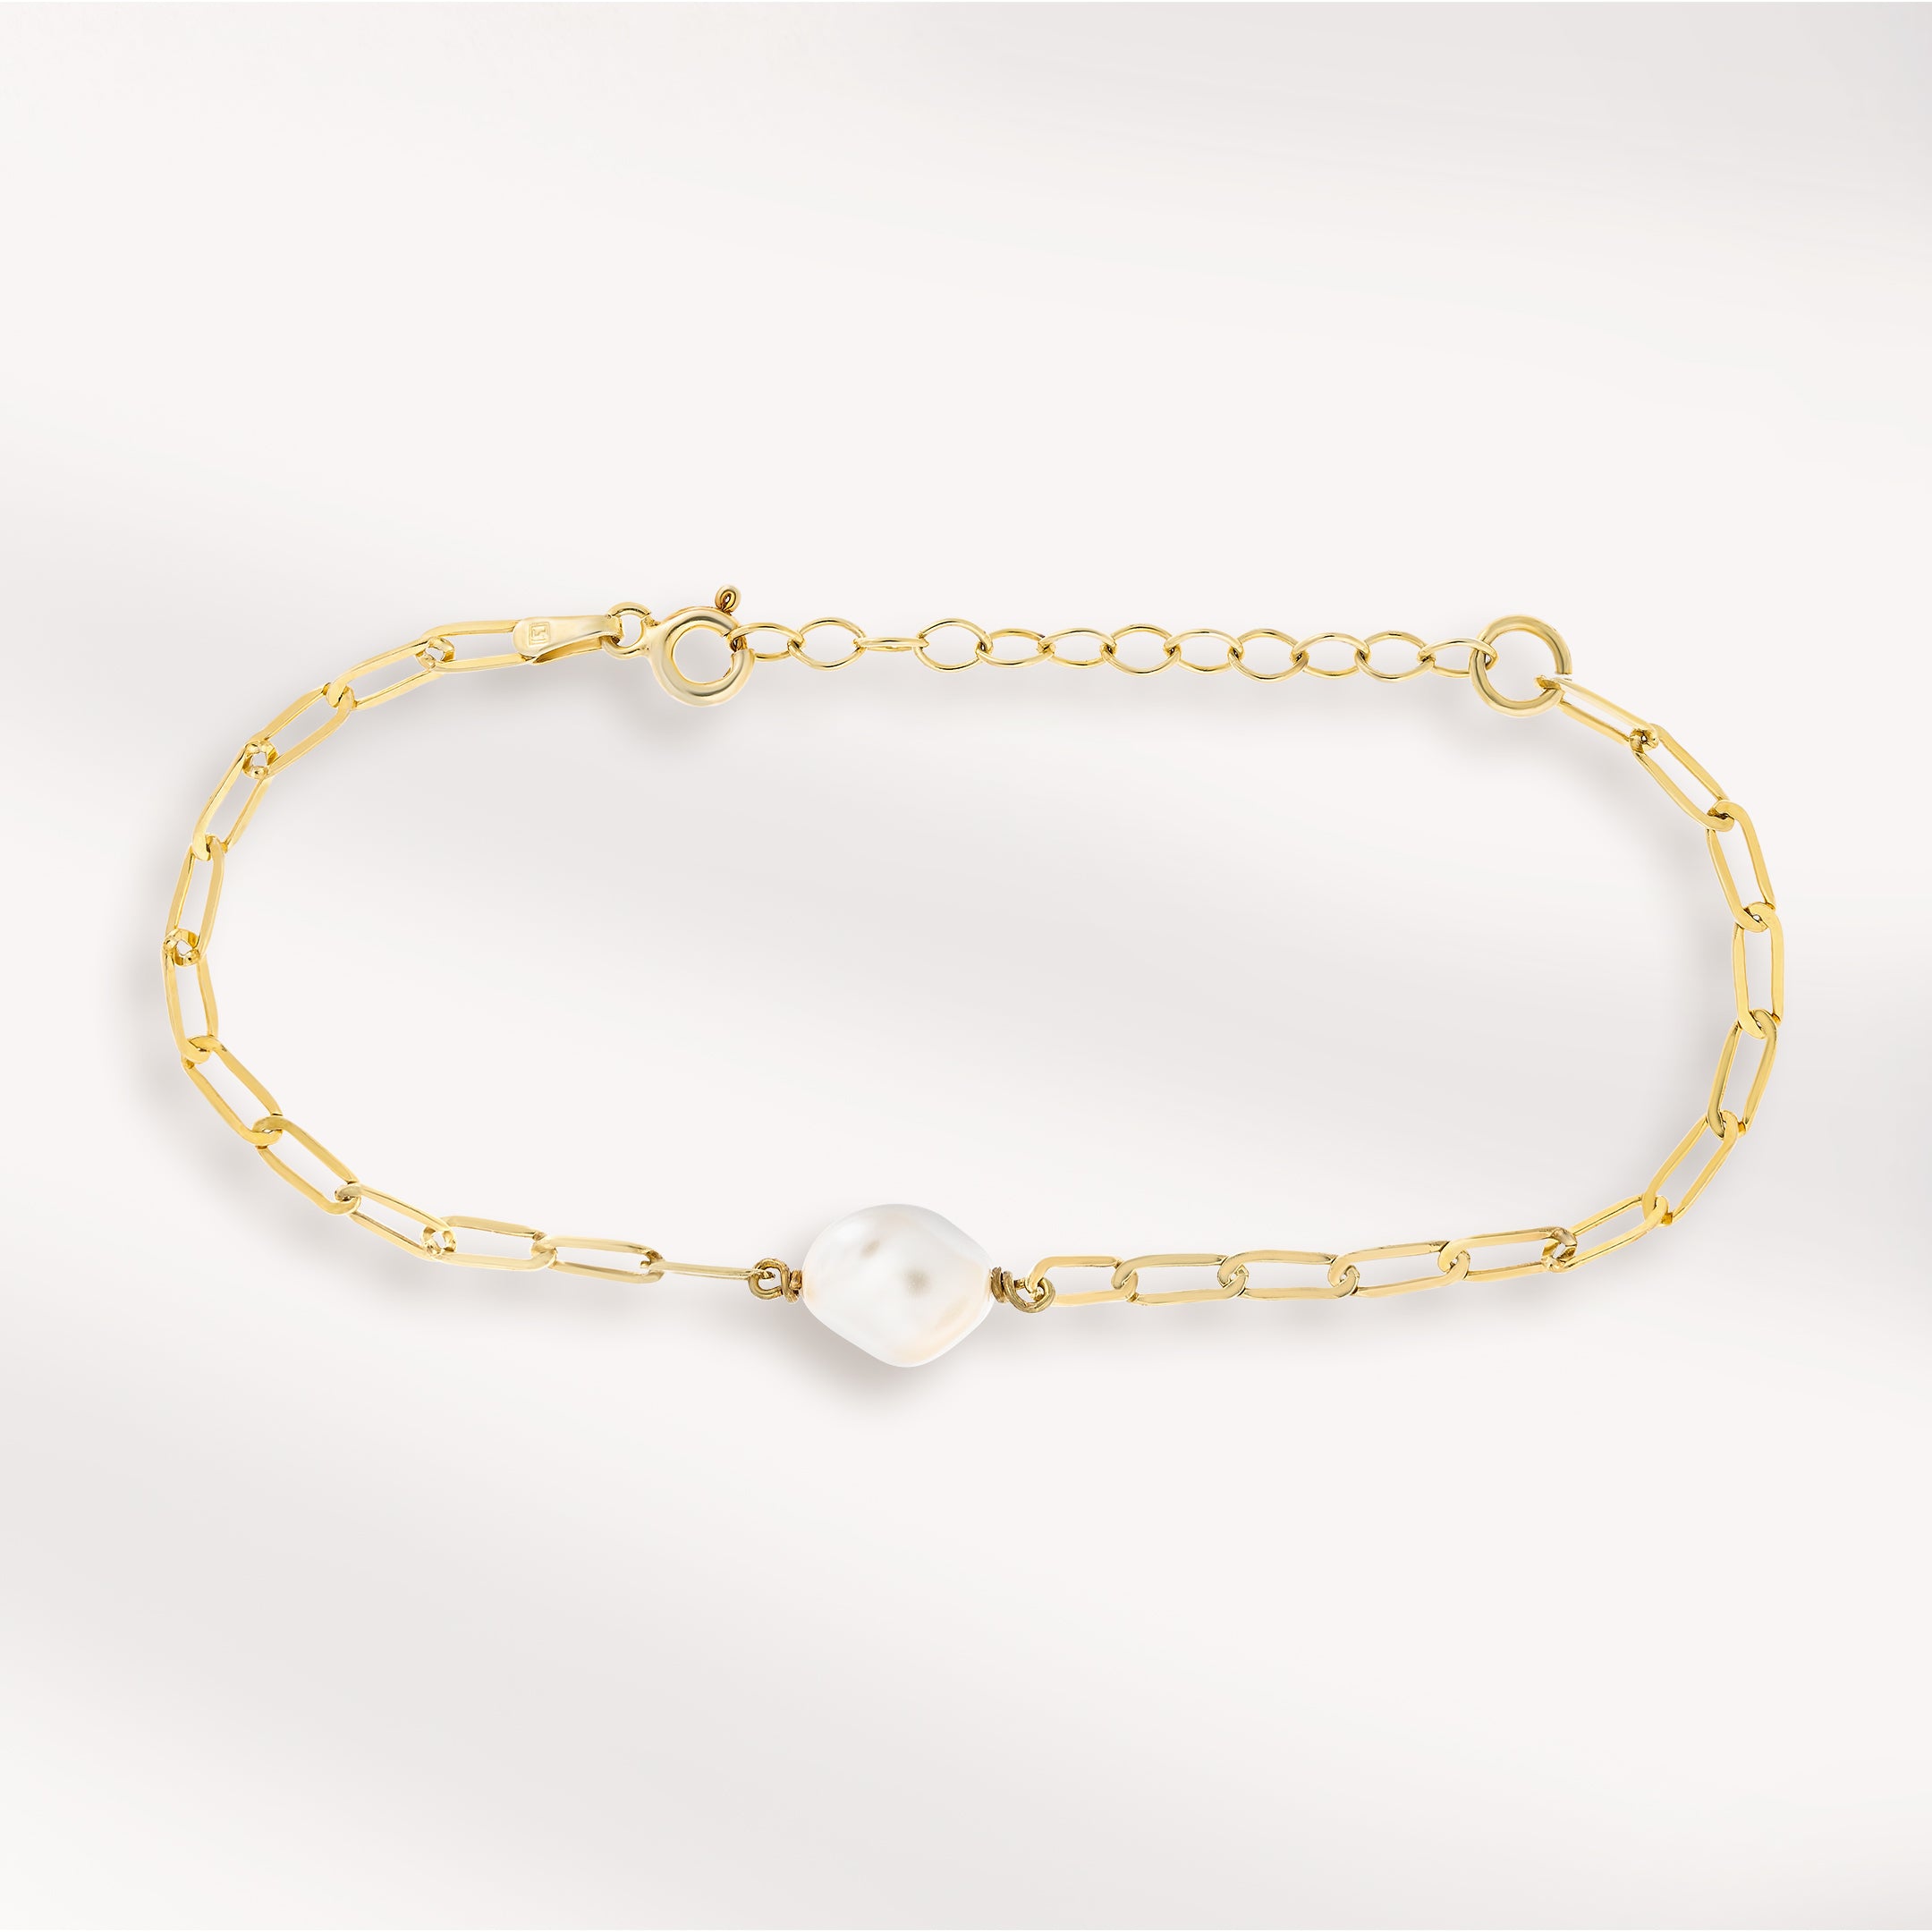 Jewellery,  Chain Bracelet, 18k Gold Plated Bracelet, 18k Pure Gold Bracelet, Silver 925 Bracelet, Handmade,Pearly Crystal, Dune Shaped Crystal 